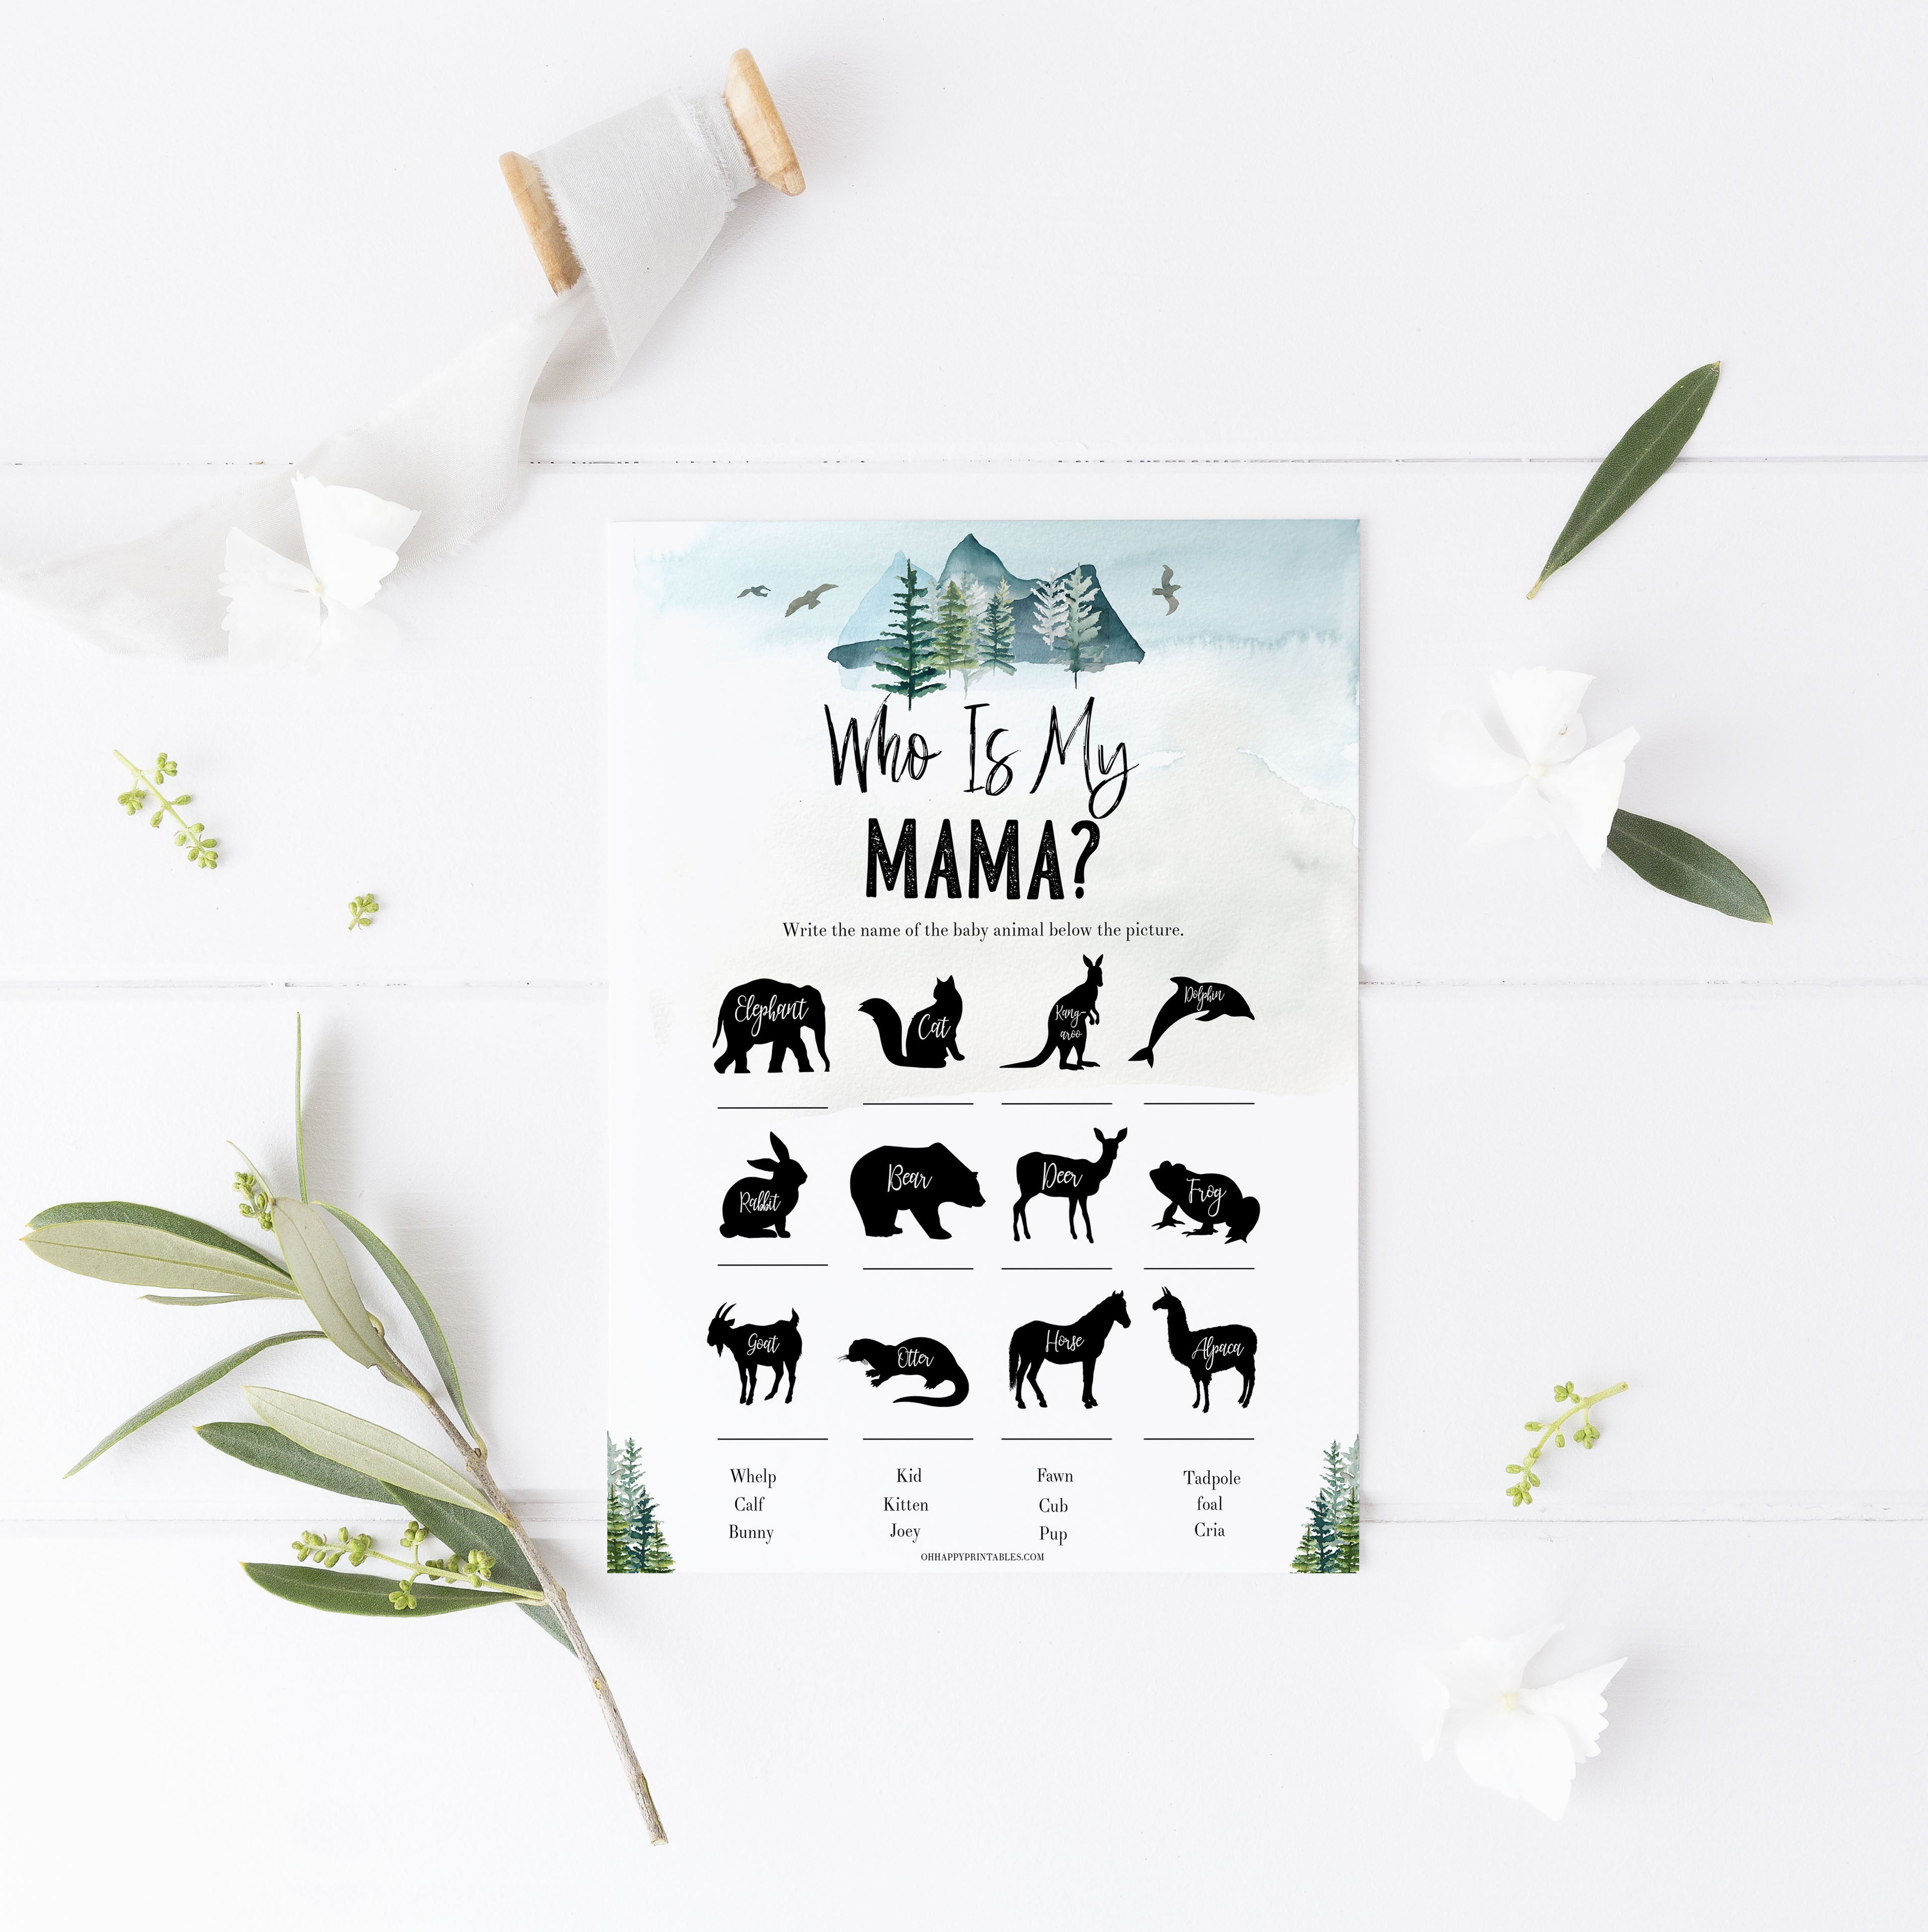 who is my mama game, Printable baby shower games, adventure awaits baby games, baby shower games, fun baby shower ideas, top baby shower ideas, adventure awaits baby shower, baby shower games, fun adventure baby shower ideas